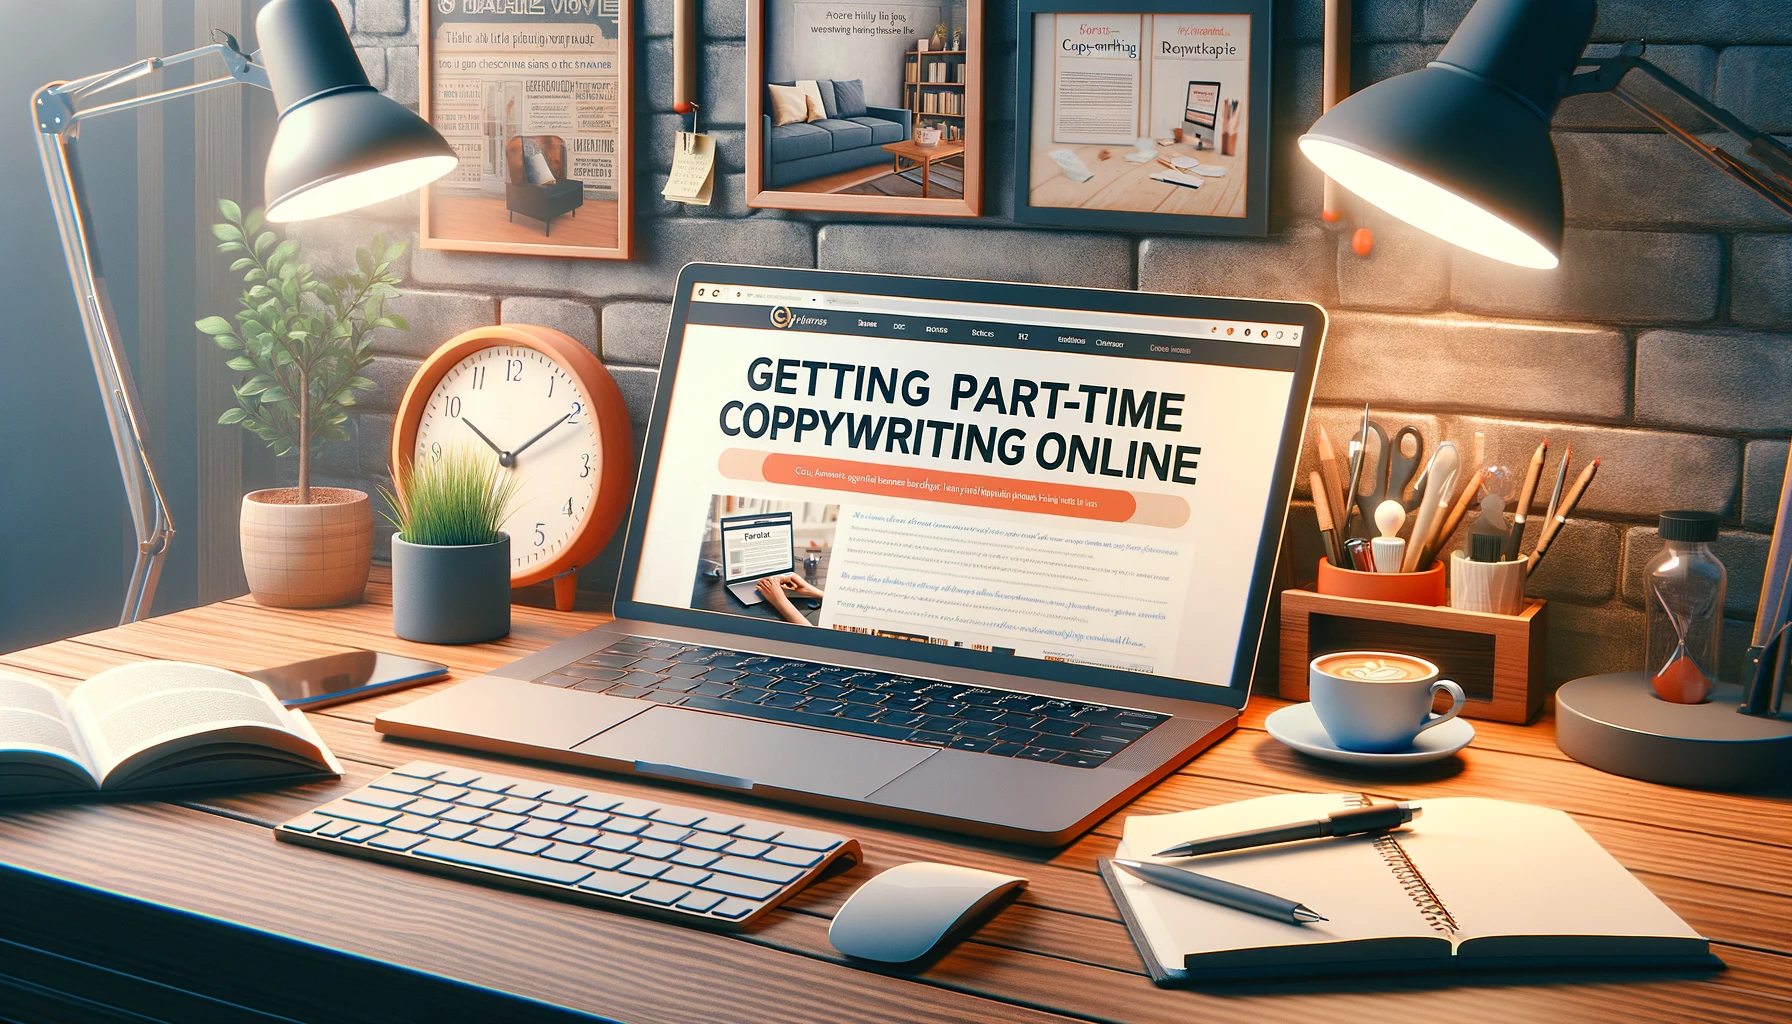 How to Get Part-Time Copywriting Jobs Online